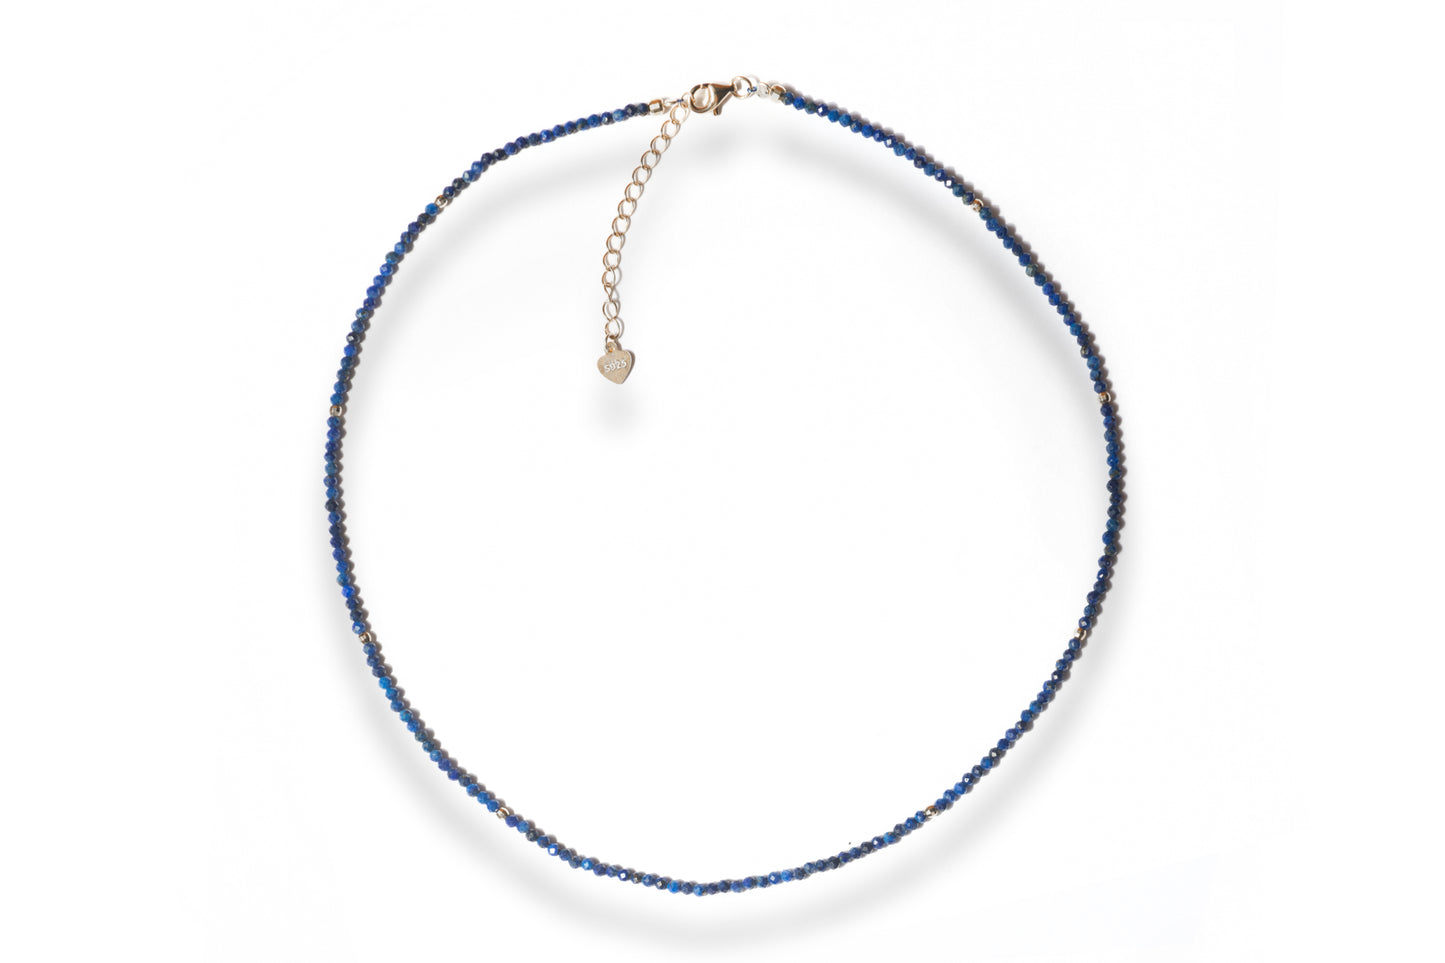 Care Band Lapis Lazuli Faceted Necklace